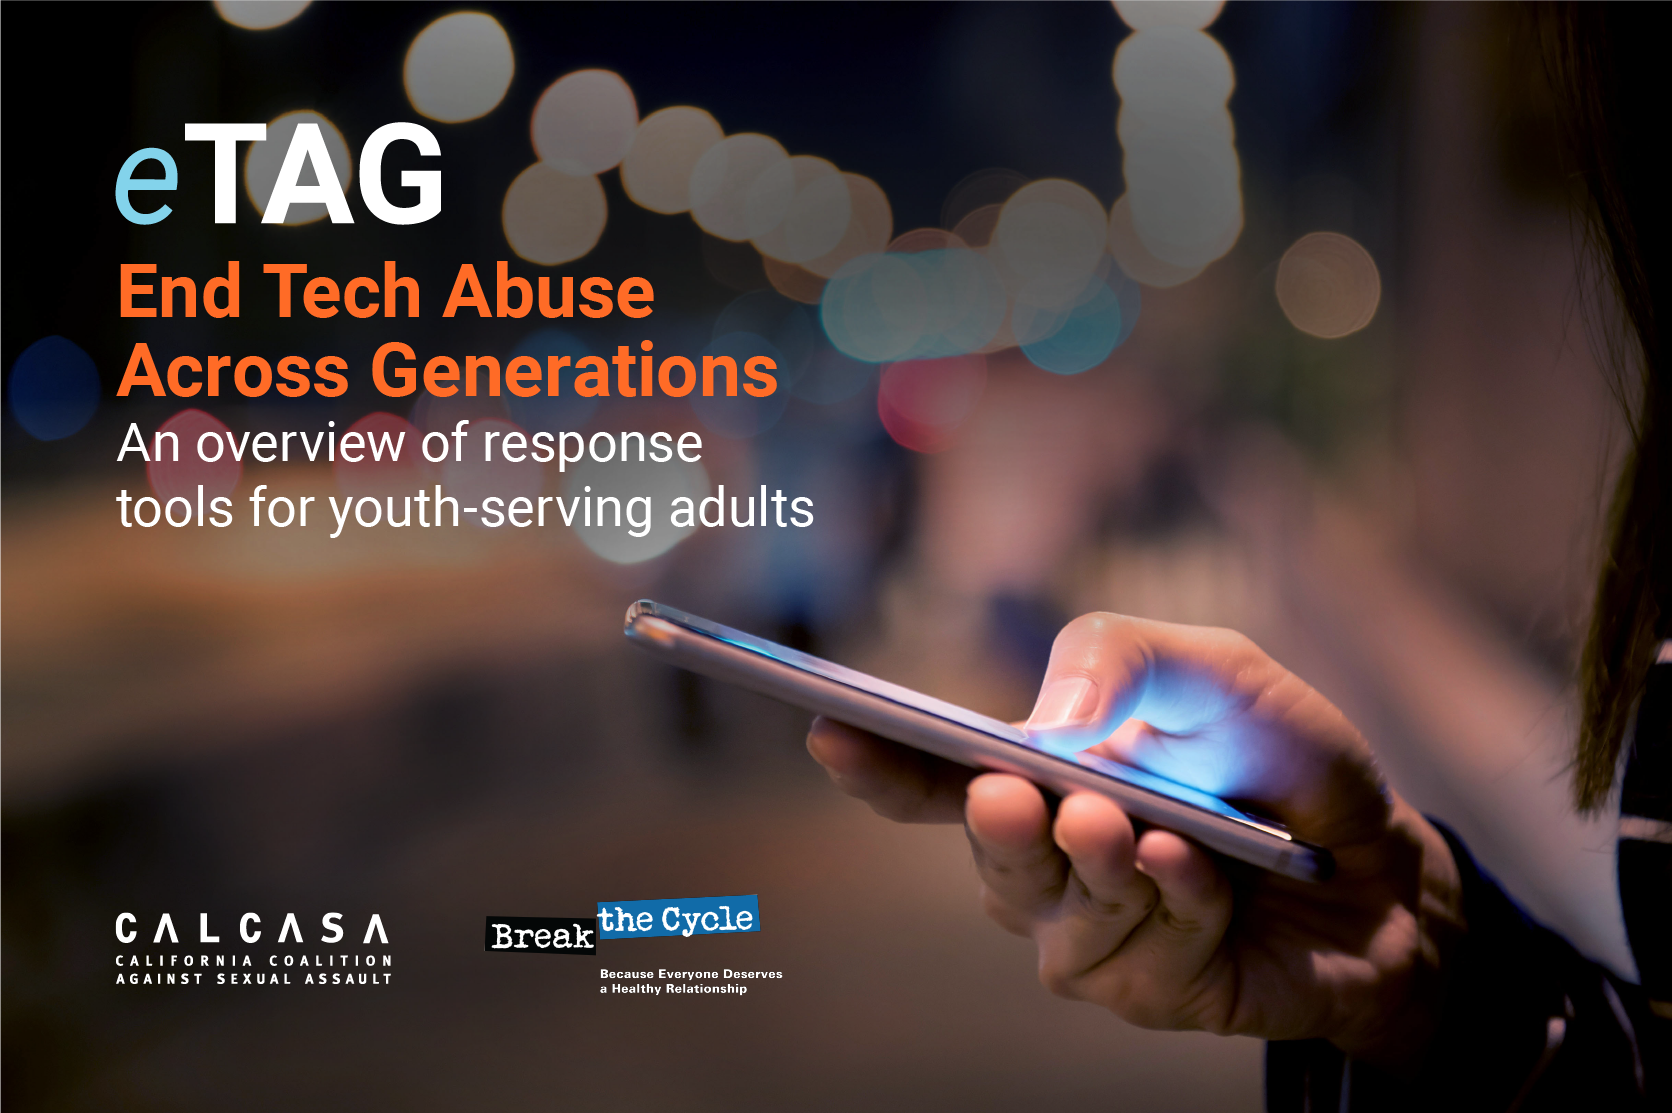 Image of a person's hand holding a cell phone. The text "eTAG End Tech Abuse Across Generations An overview of response tools for youth-serving adults" appears over the image. CALCASA and Break the Cycle logos are in the bottom right hand corner. 